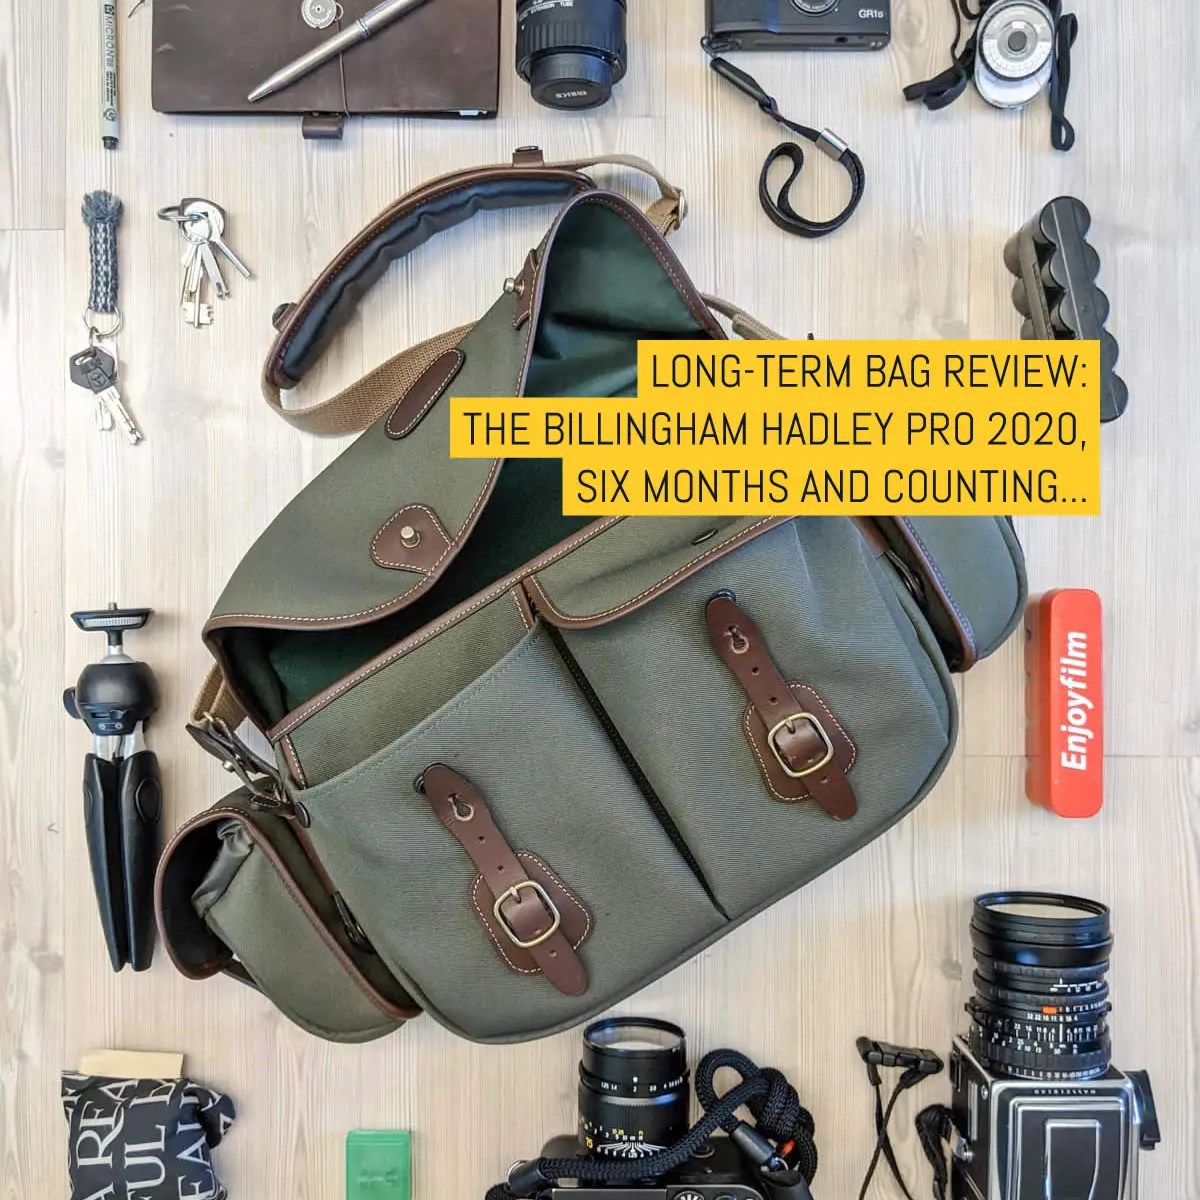 Long-term bag review: The Billingham Hadley Pro 2020, six months and counting...